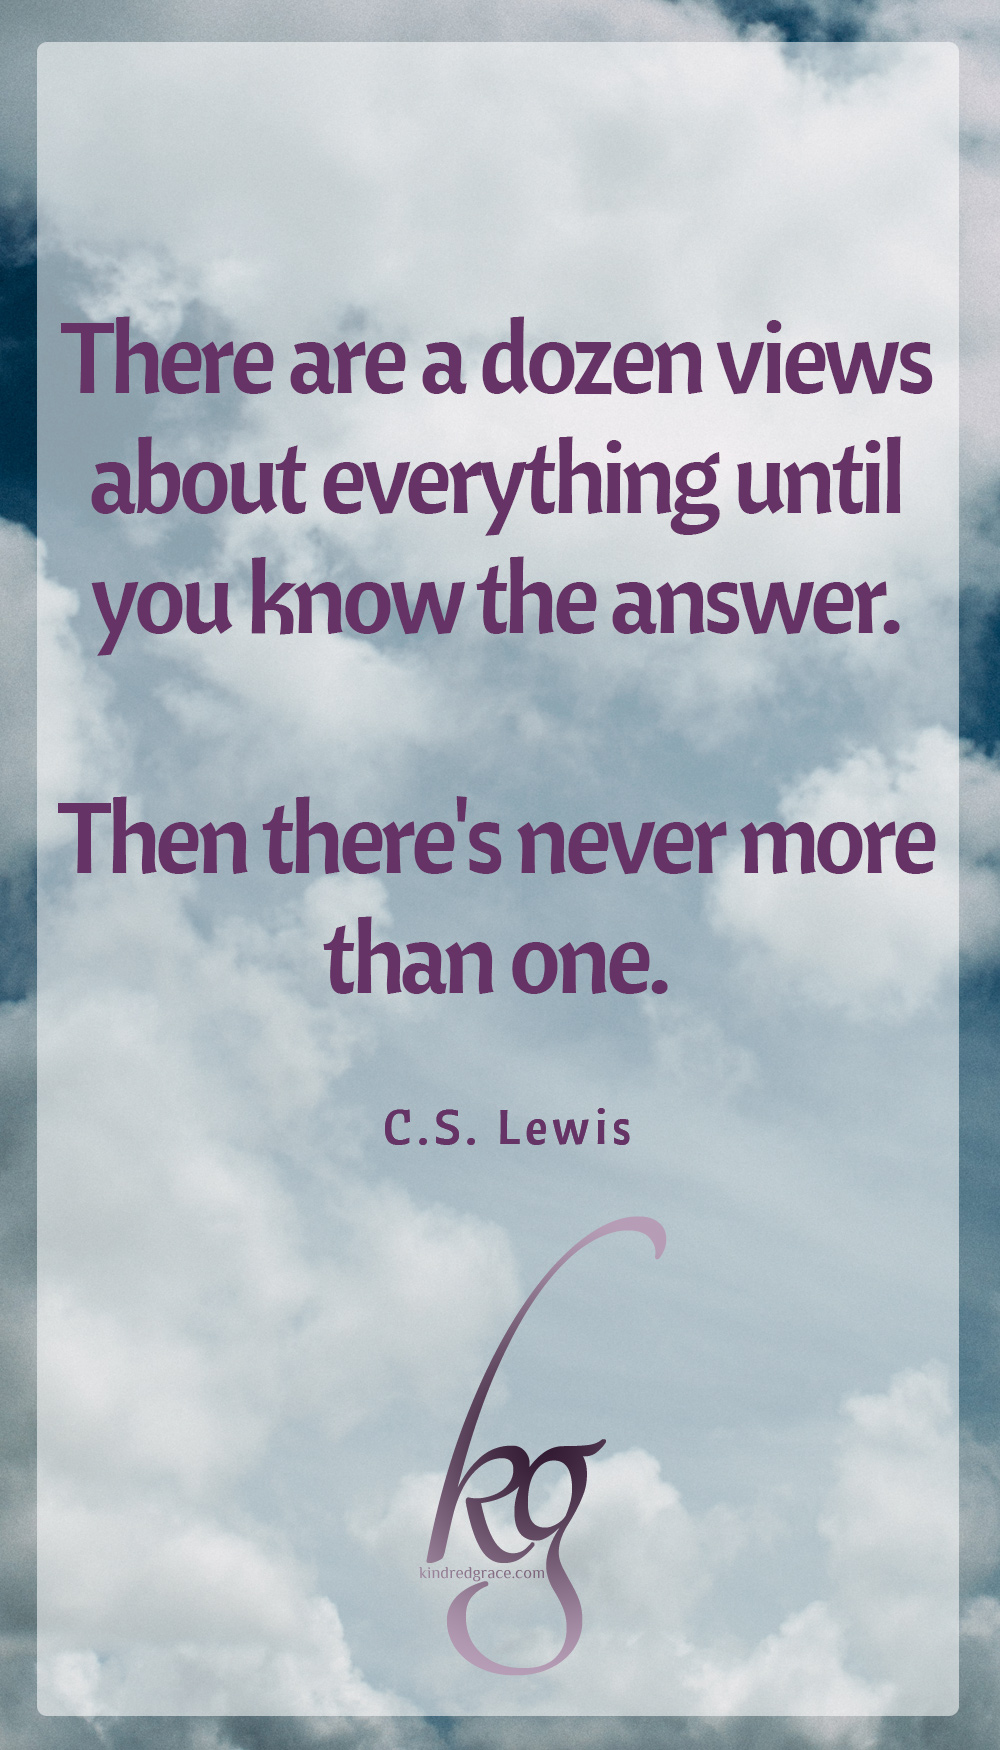 “There are a dozen views about everything until you know the answer. Then there's never more than one.” (C.S. Lewis in “That Hideous Strength”)